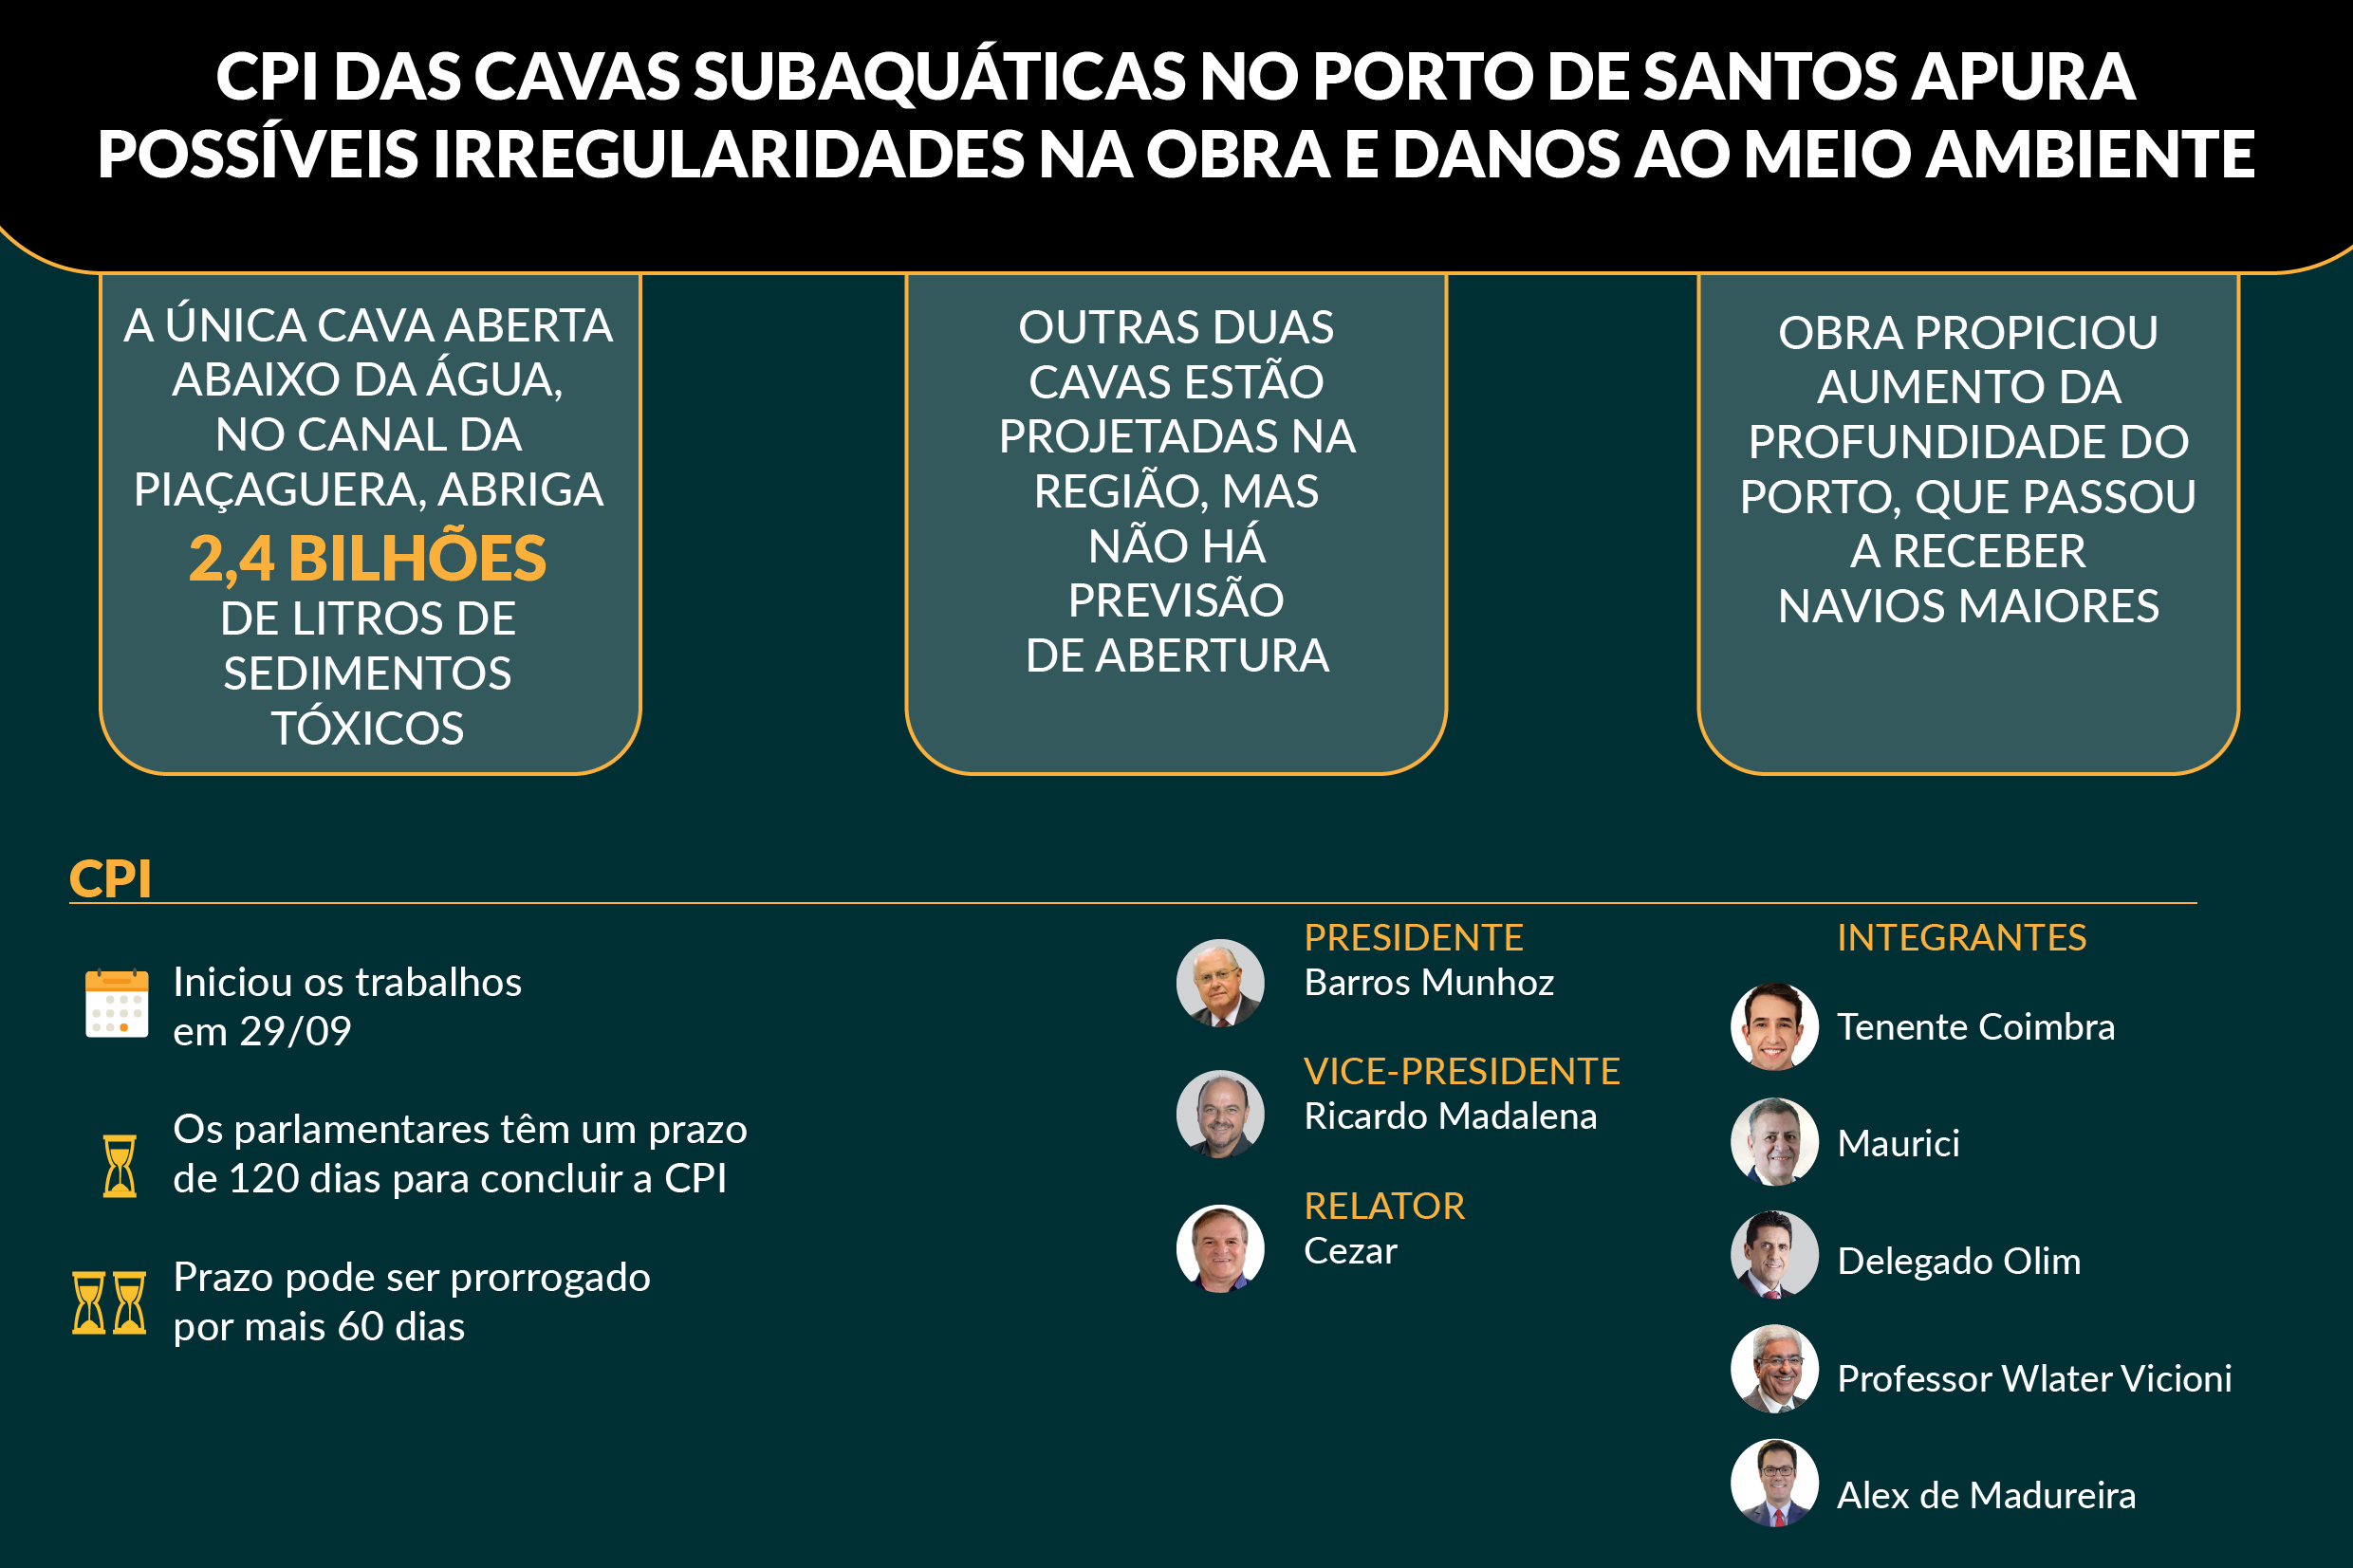 Infogrfico<a style='float:right' href='https://www3.al.sp.gov.br/repositorio/noticia/N-10-2021/fg277249.jpg' target=_blank><img src='/_img/material-file-download-white.png' width='14px' alt='Clique para baixar a imagem'></a>